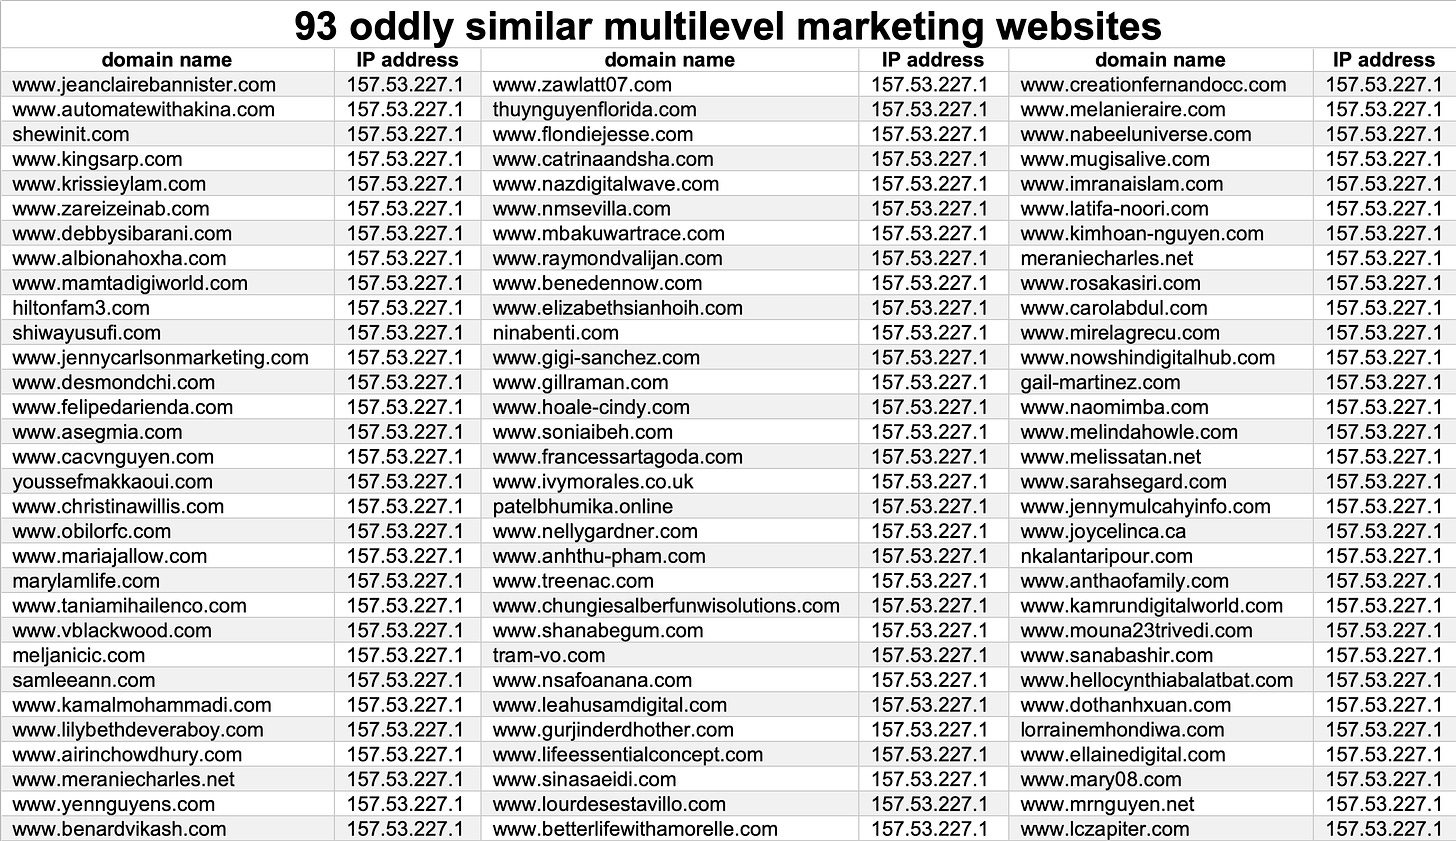 table of 93 multilevel marketing websites with the same IP address (157.53.227.1)